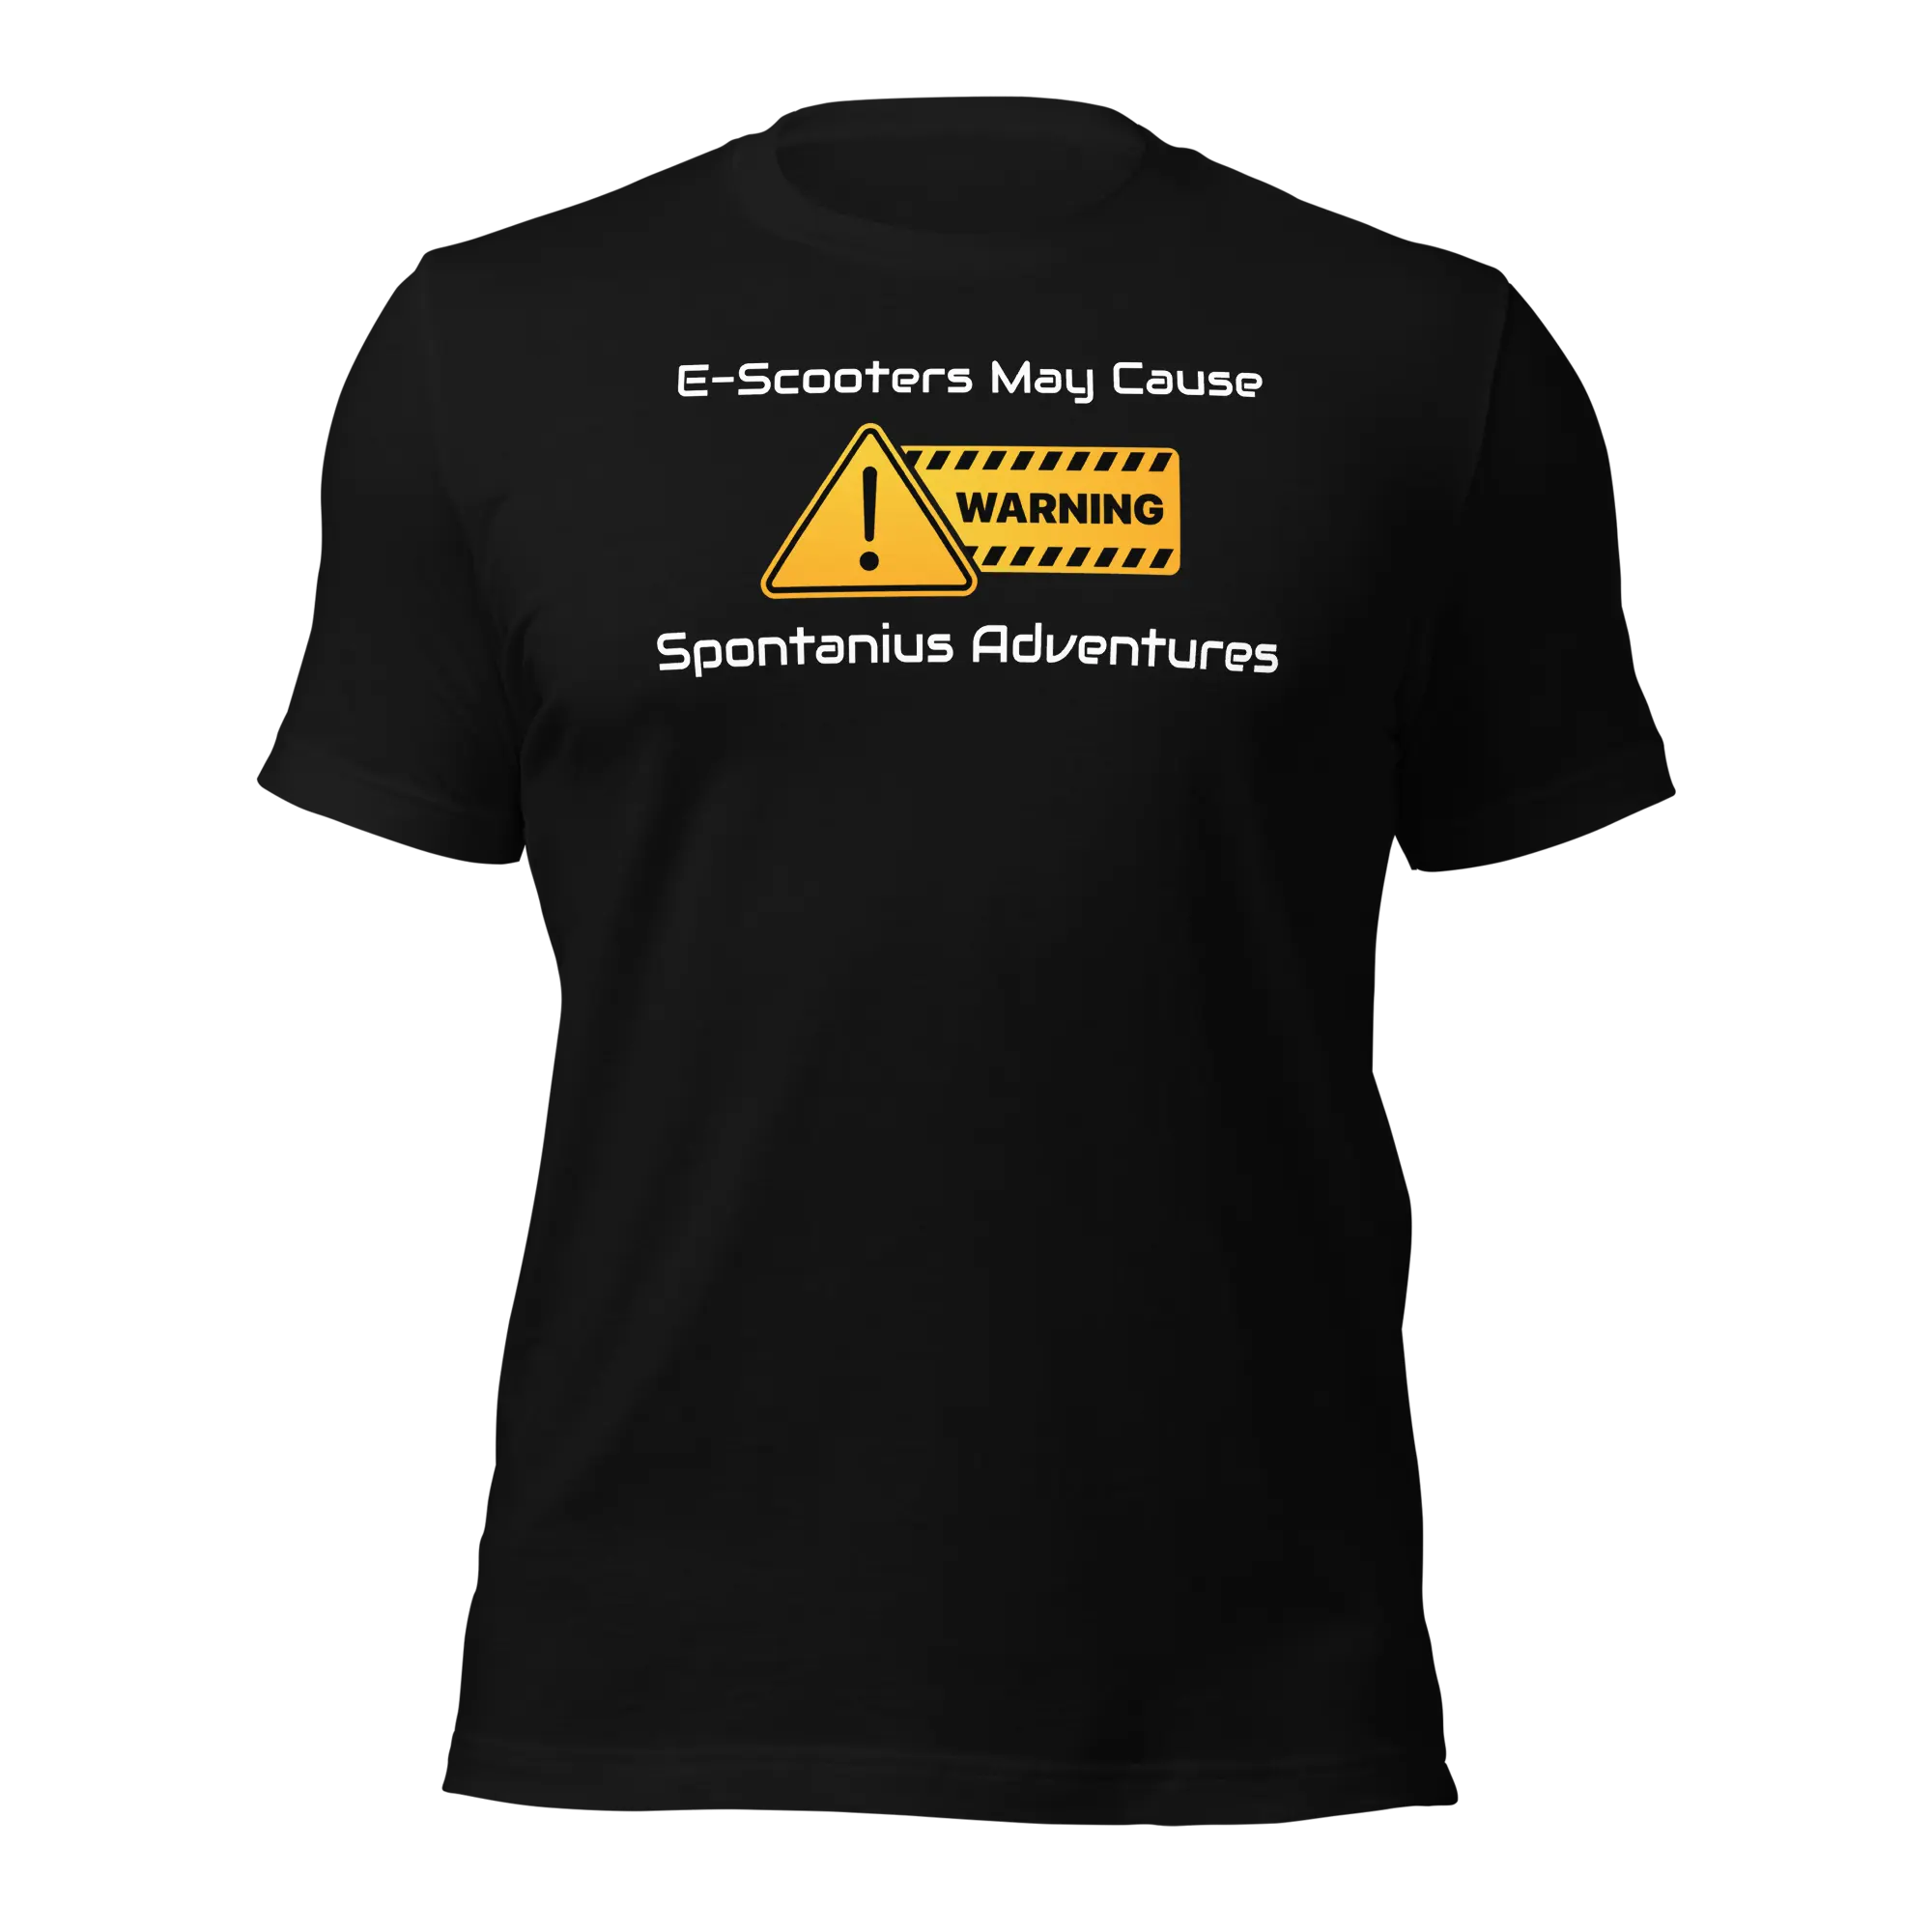 Funny T-Shirt: E-Scooters May Cause Spontaneous Adventures (Black)